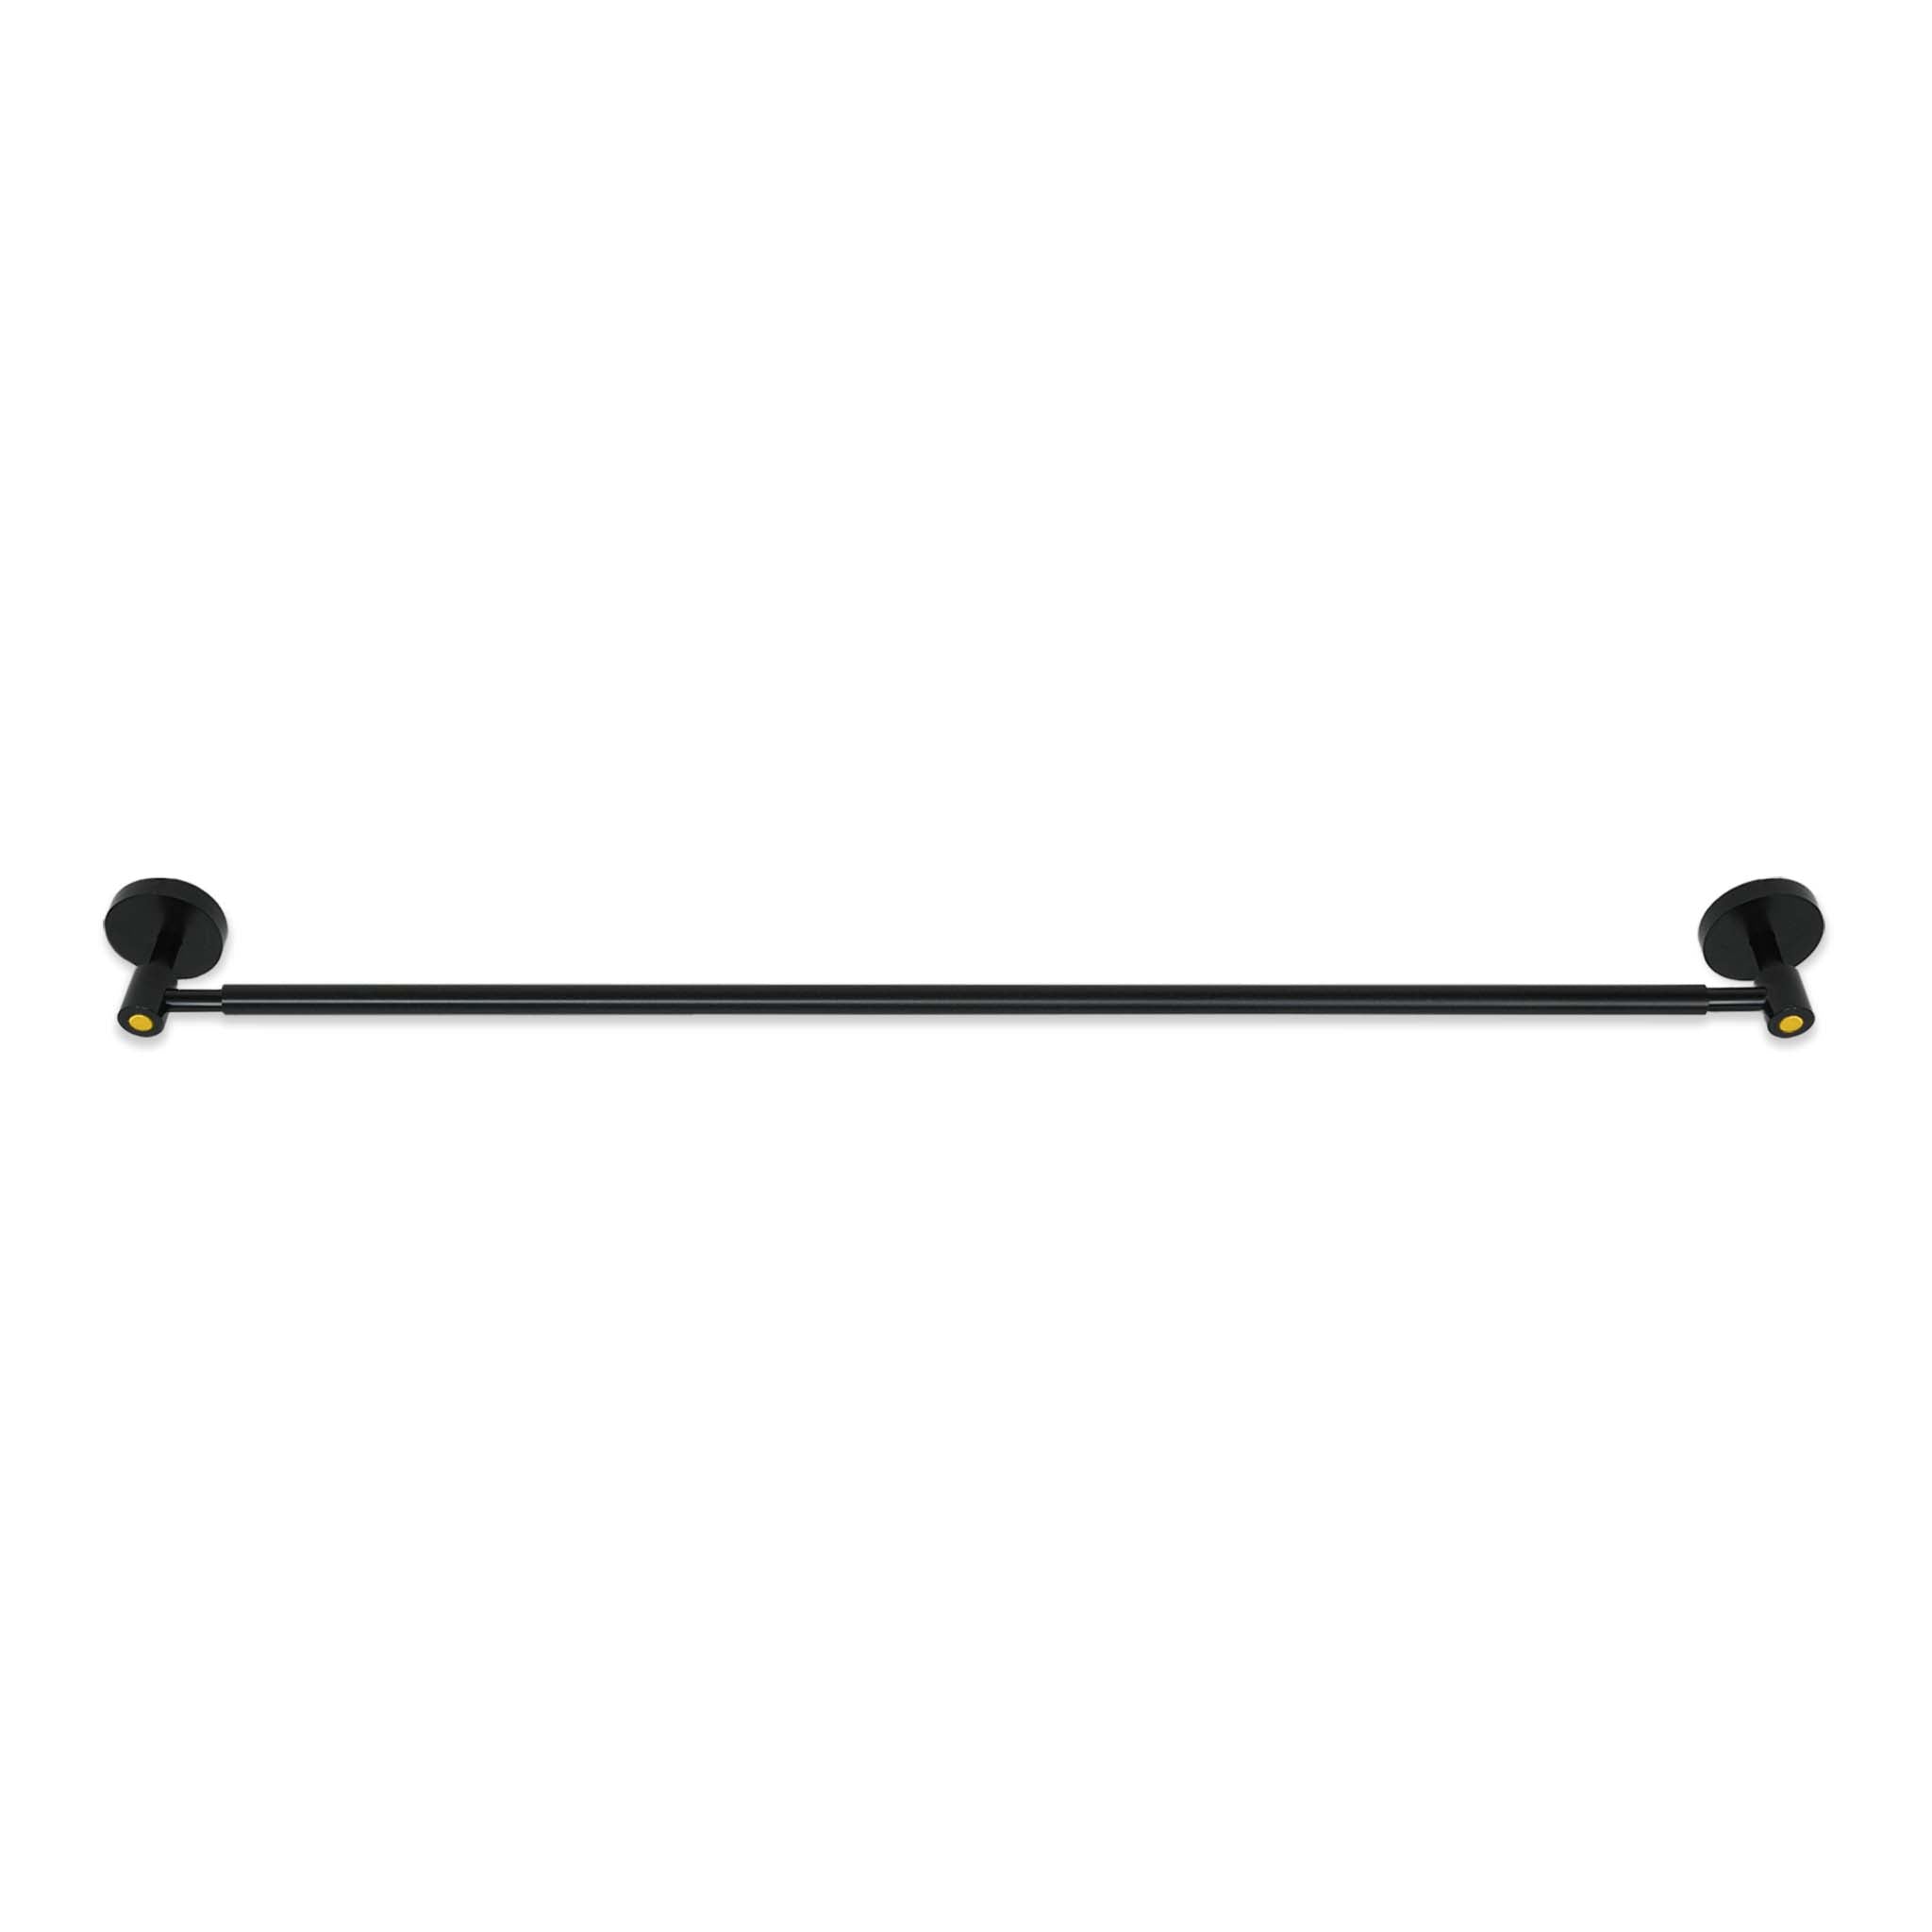 Black and ochre color Head towel bar 24" Dutton Brown hardware